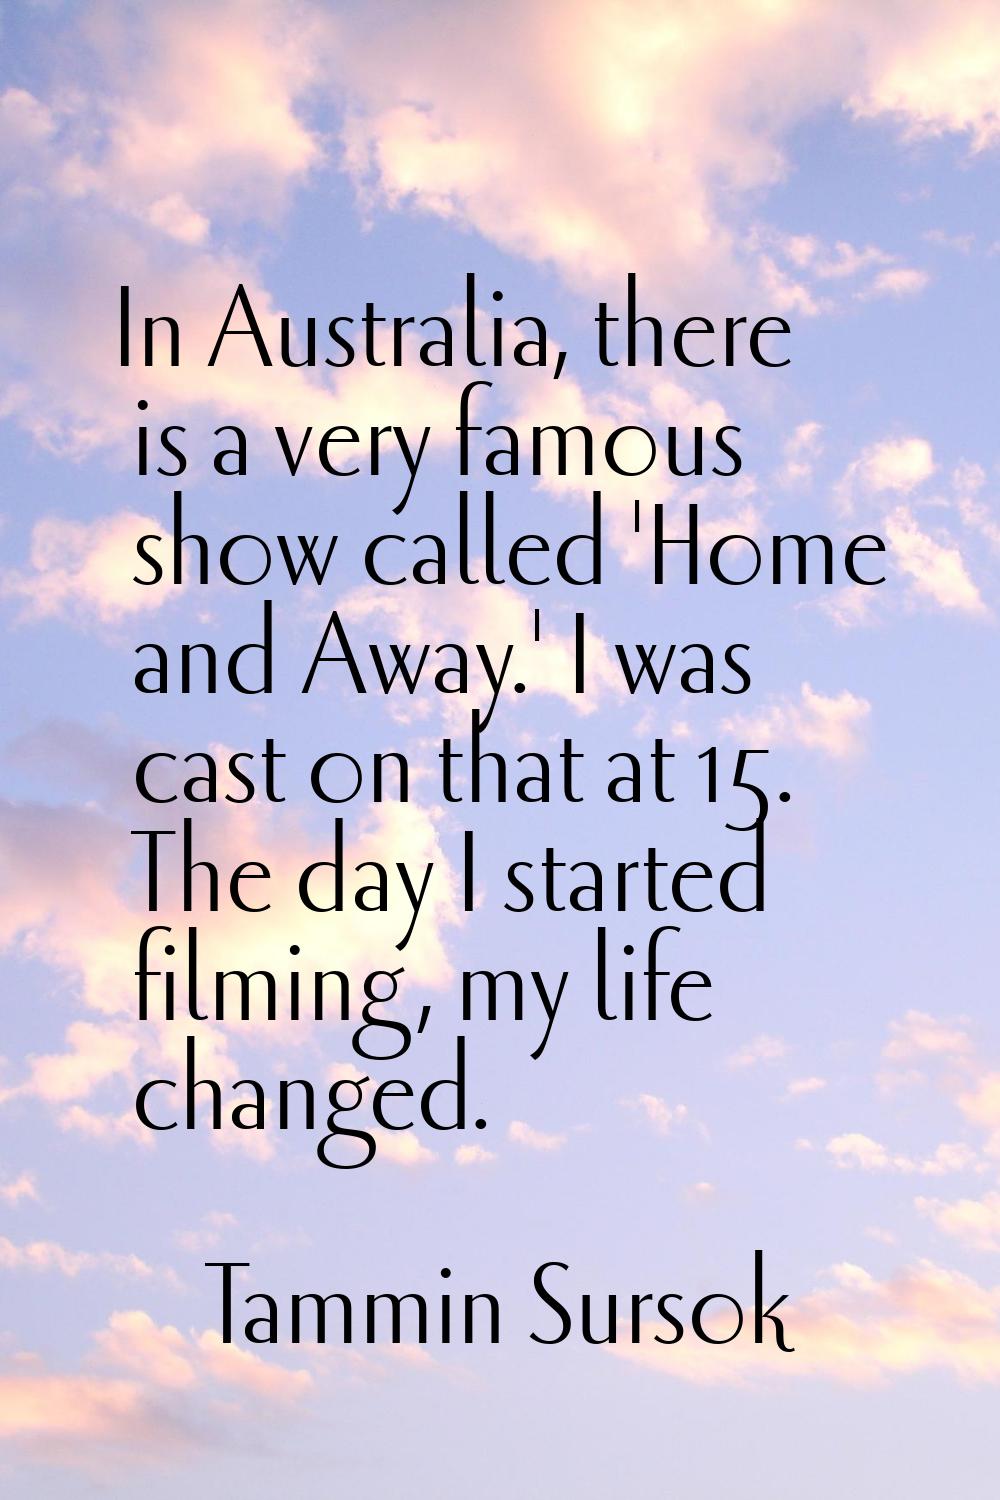 In Australia, there is a very famous show called 'Home and Away.' I was cast on that at 15. The day